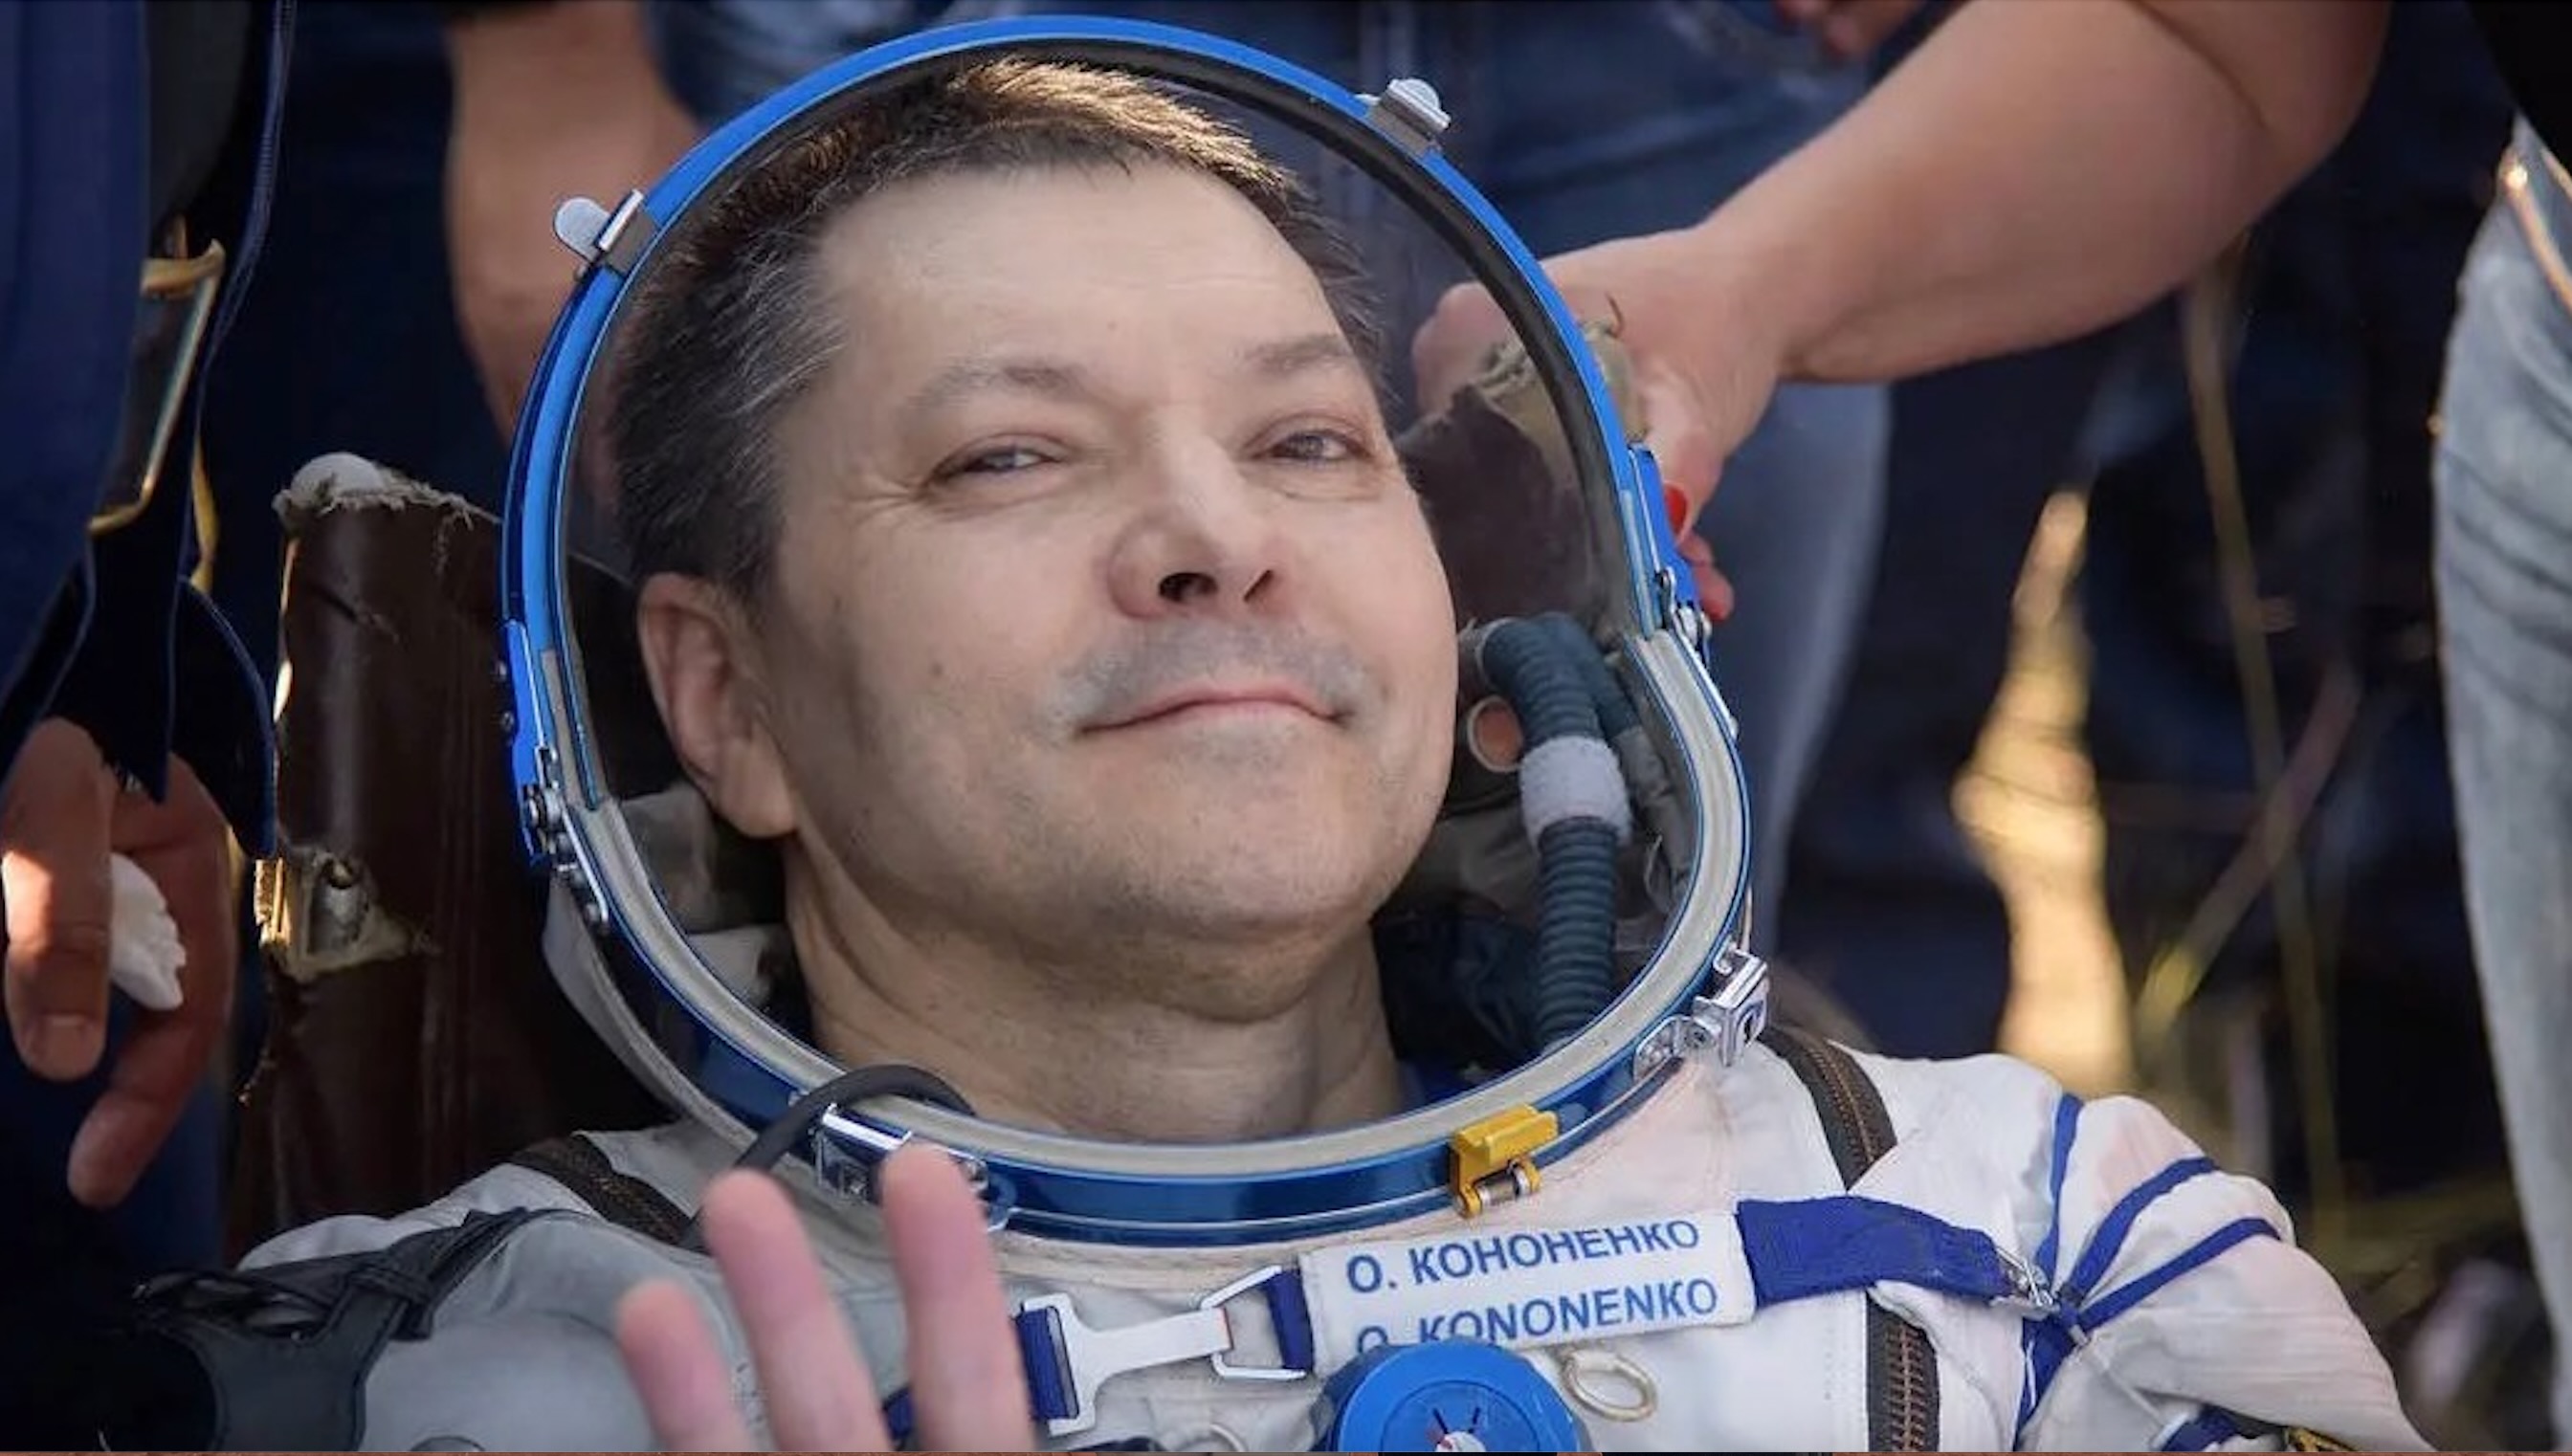 879 days! Russian cosmonaut breaks record for total time spent in space Space